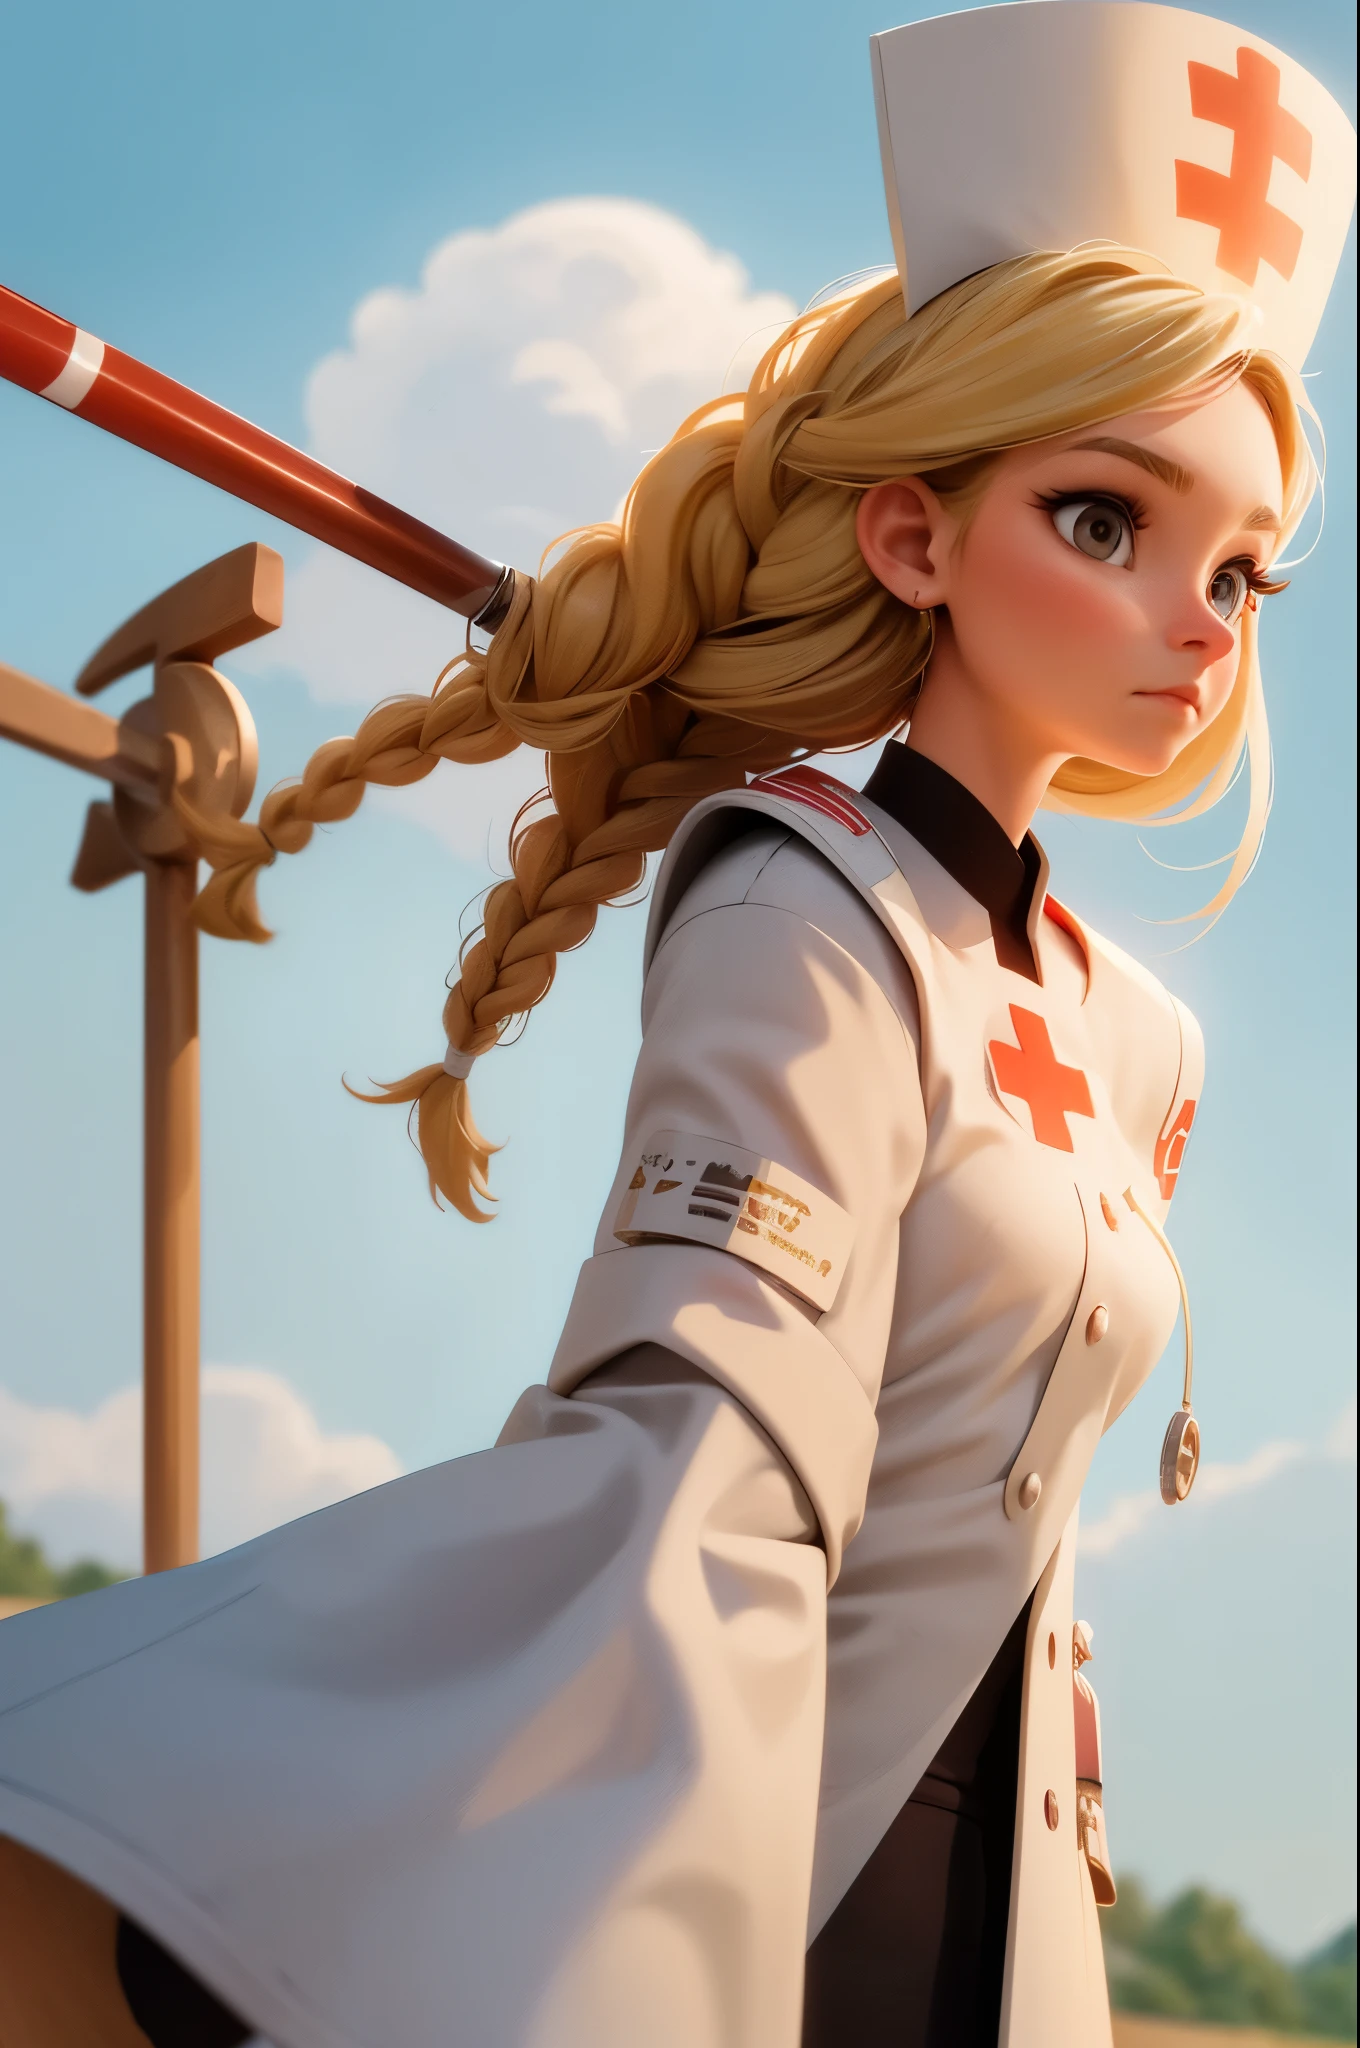 1girl, Blonde braided hair, Warrior Nurse with sword on the battlefield, dressed in Glossy White Leather with Red Cross Symbol, Nurse.